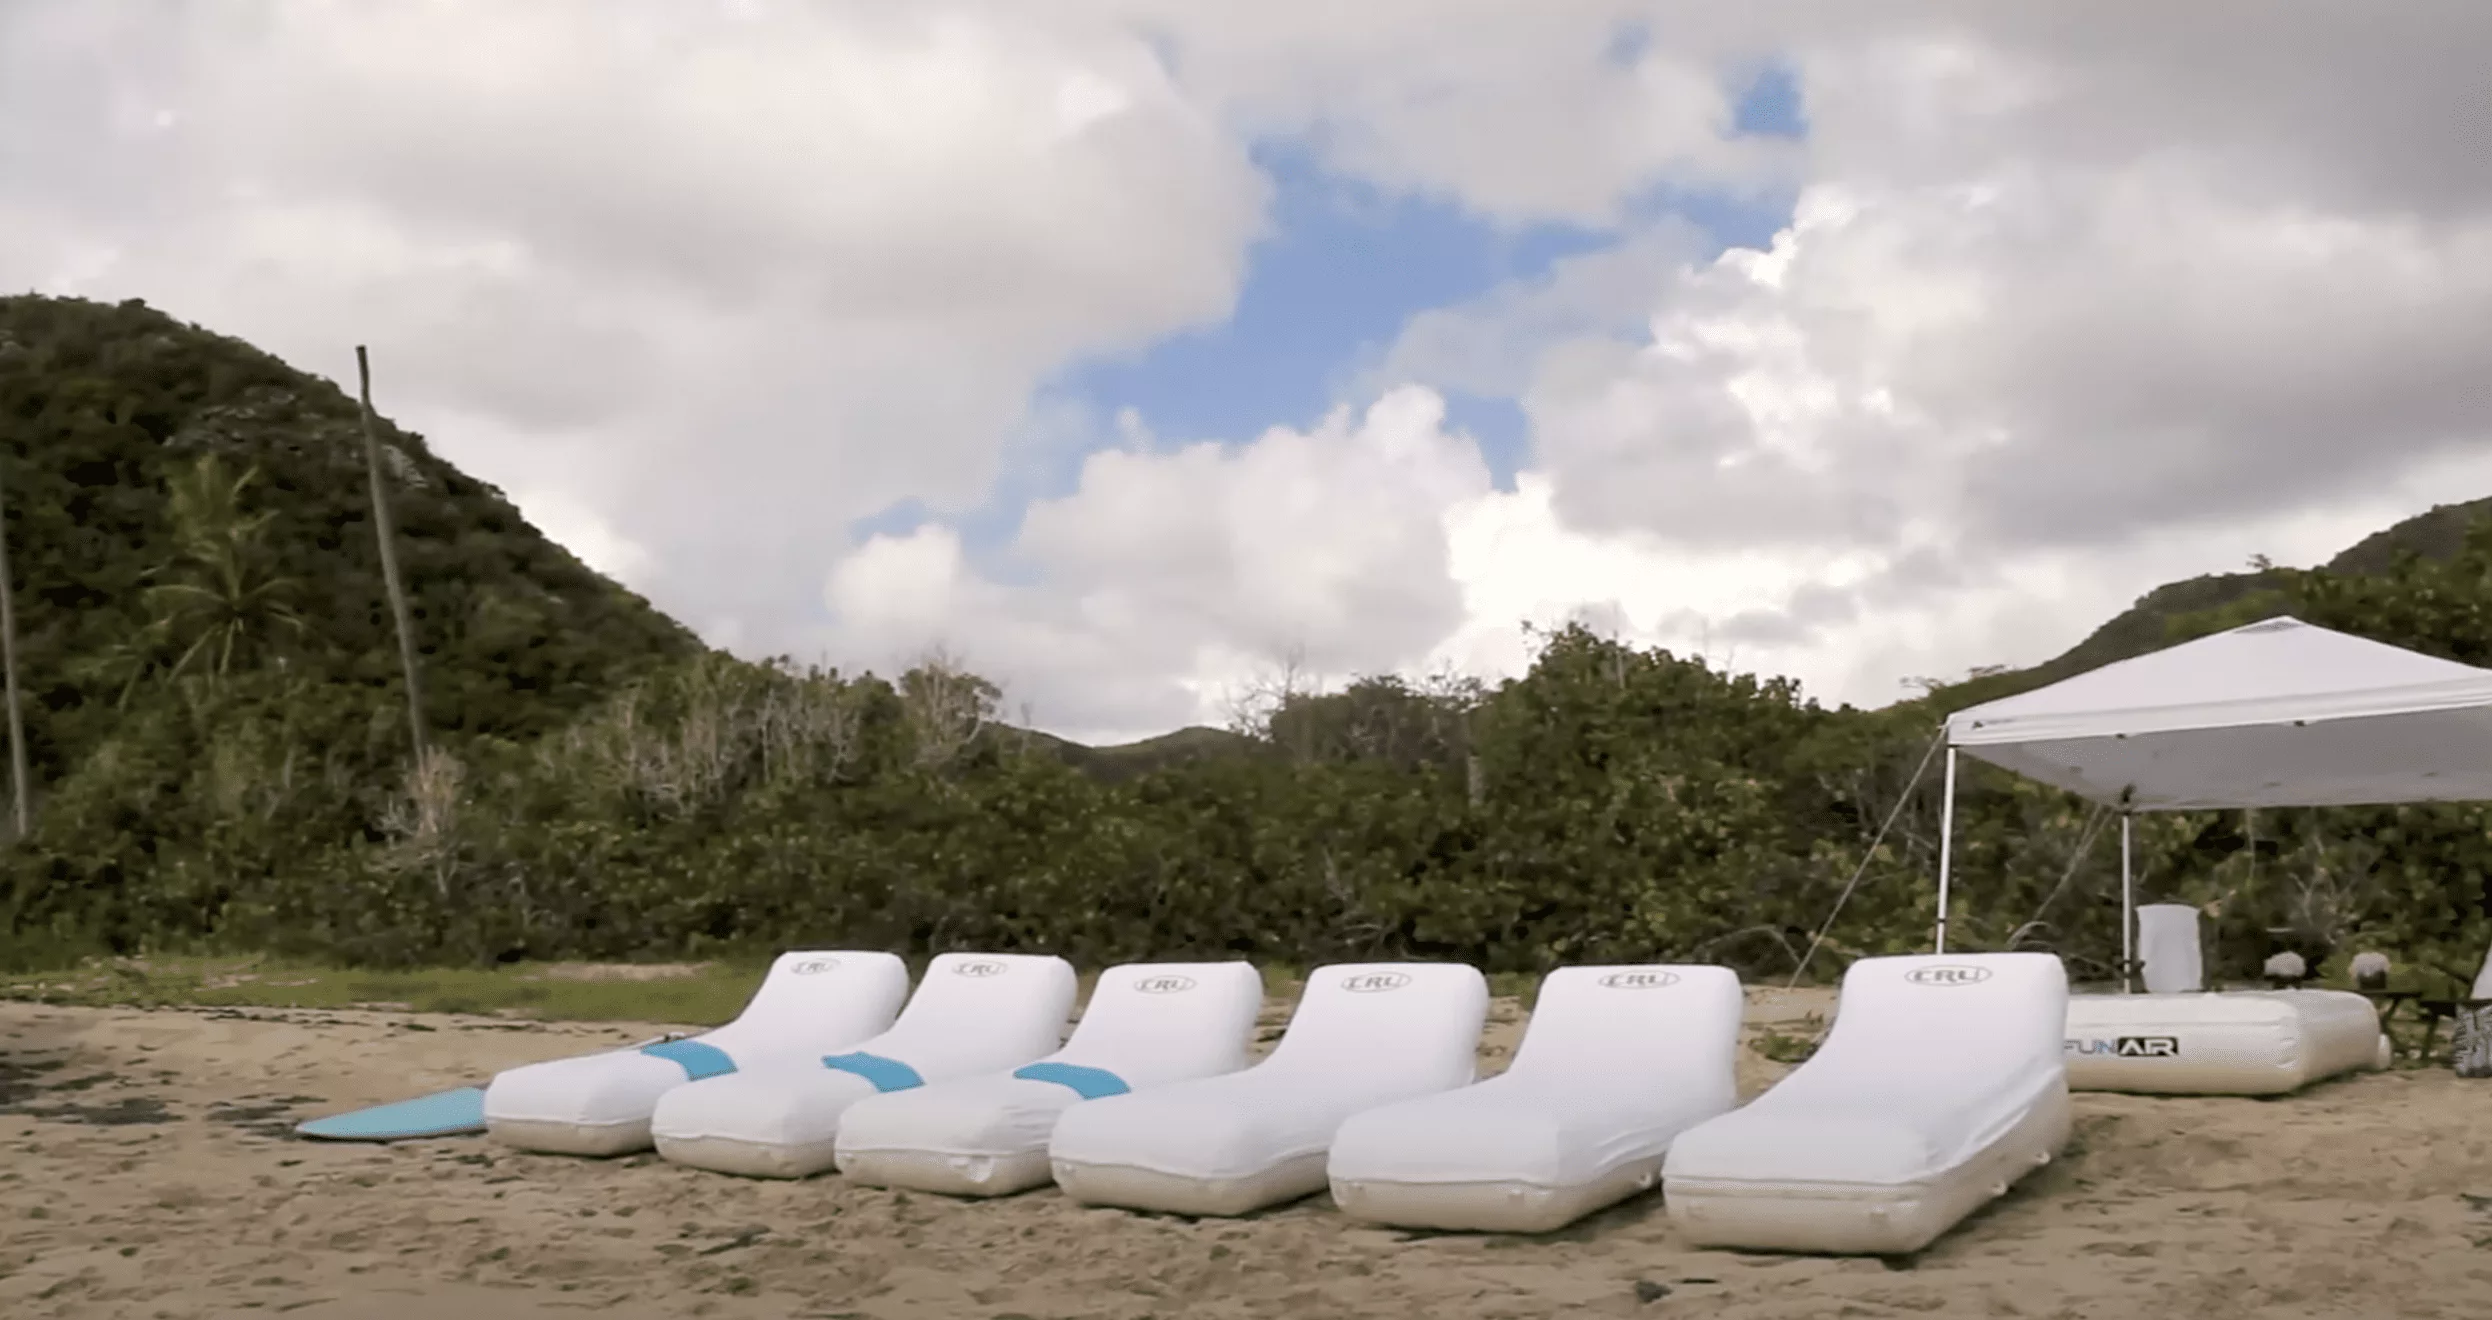 Relax on the beach in style on the FunAir inflatable lounger